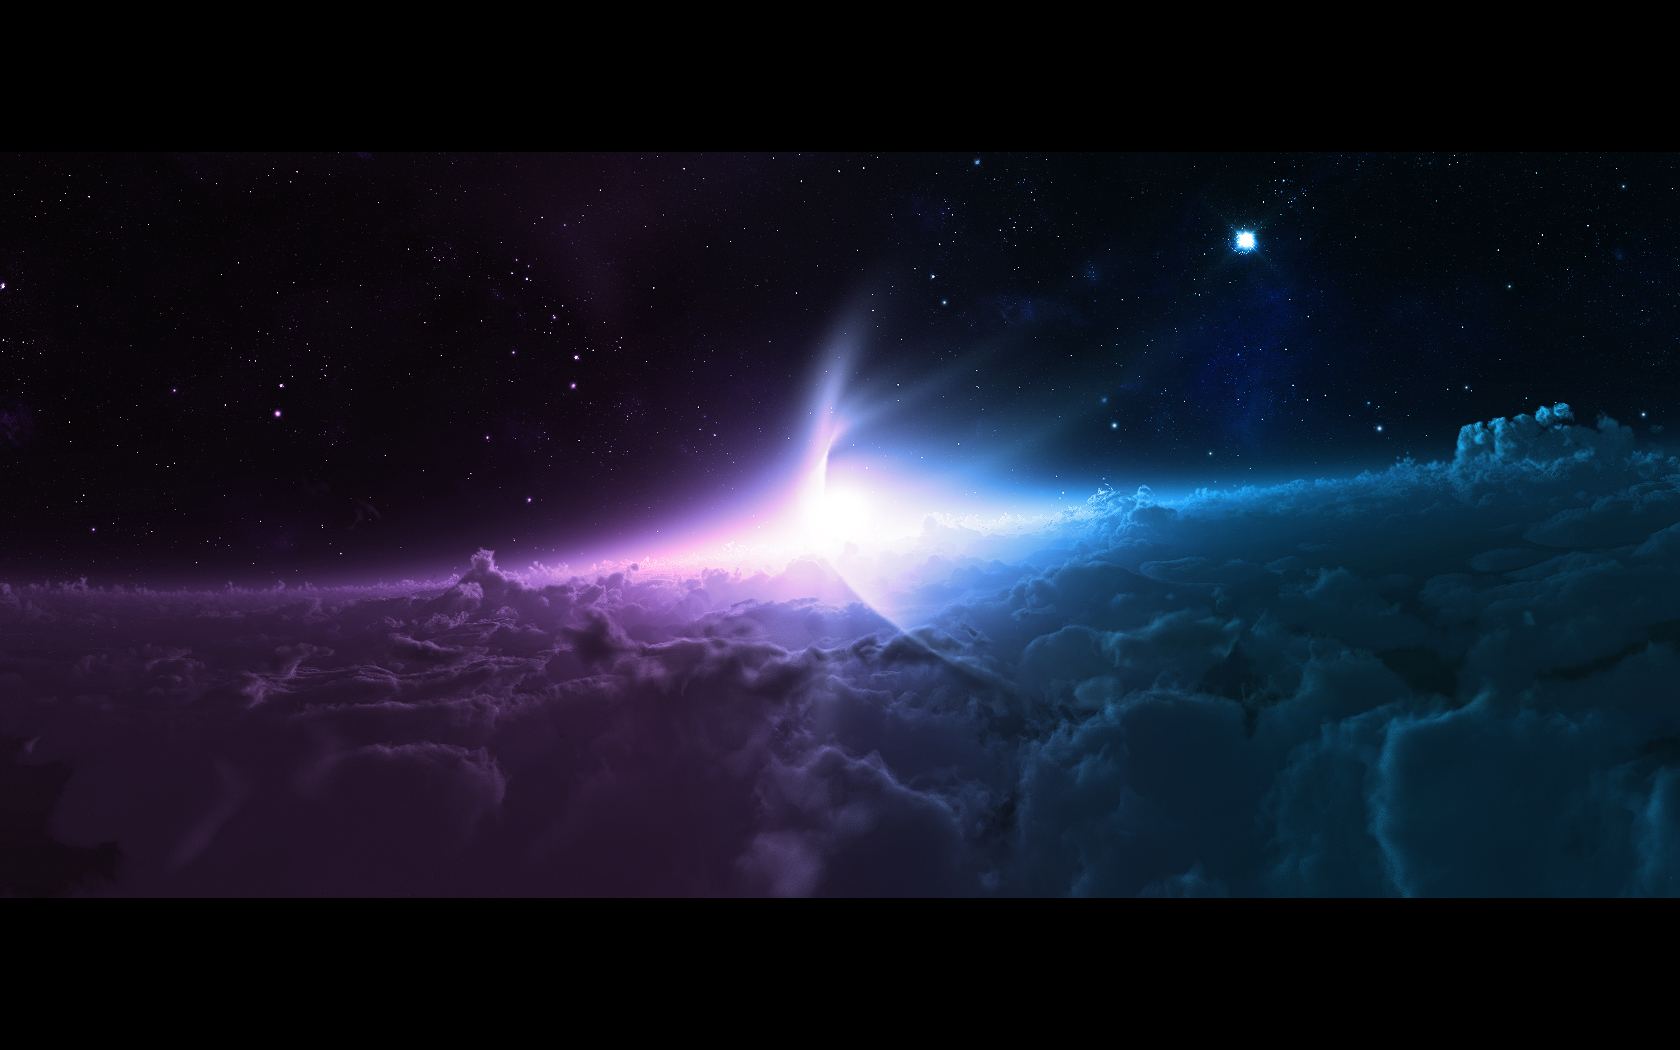 SpaceFantasy Wallpaper Set 29 Awesome Wallpapers